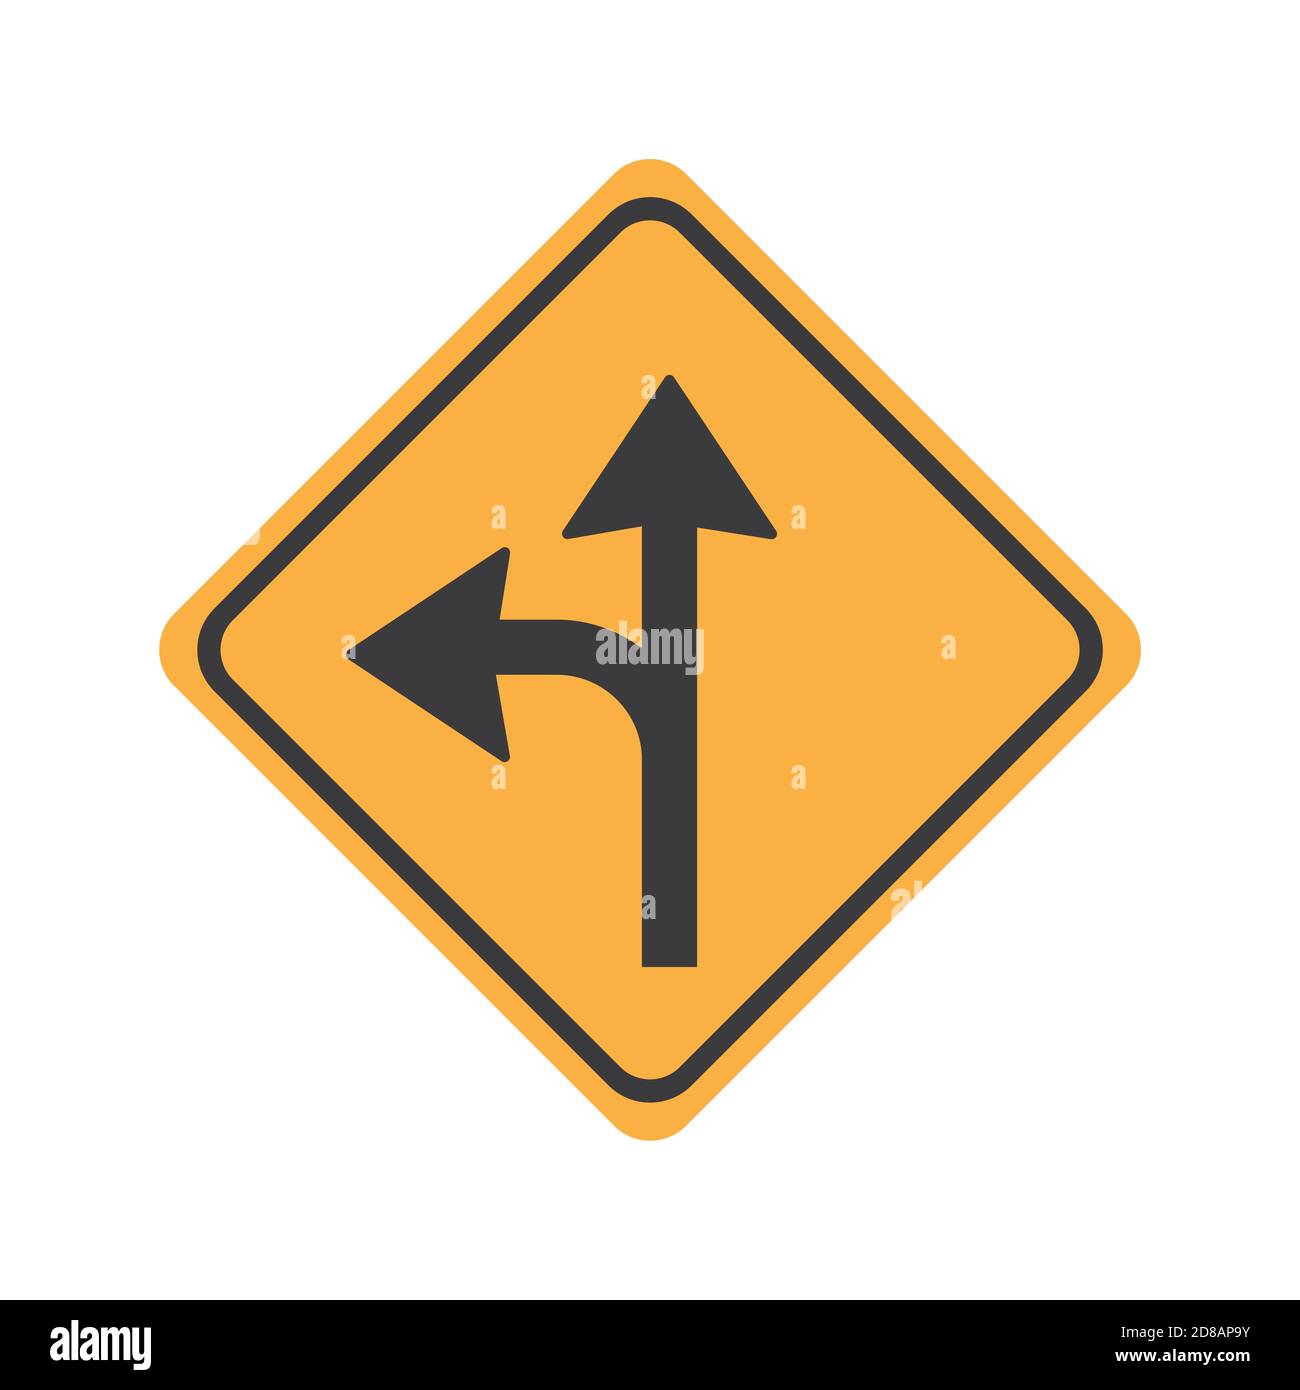 Turn left or proceed straight glyph icon road sign vector illustration in white background. Turn left or proceed straight icon sign Stock Vector